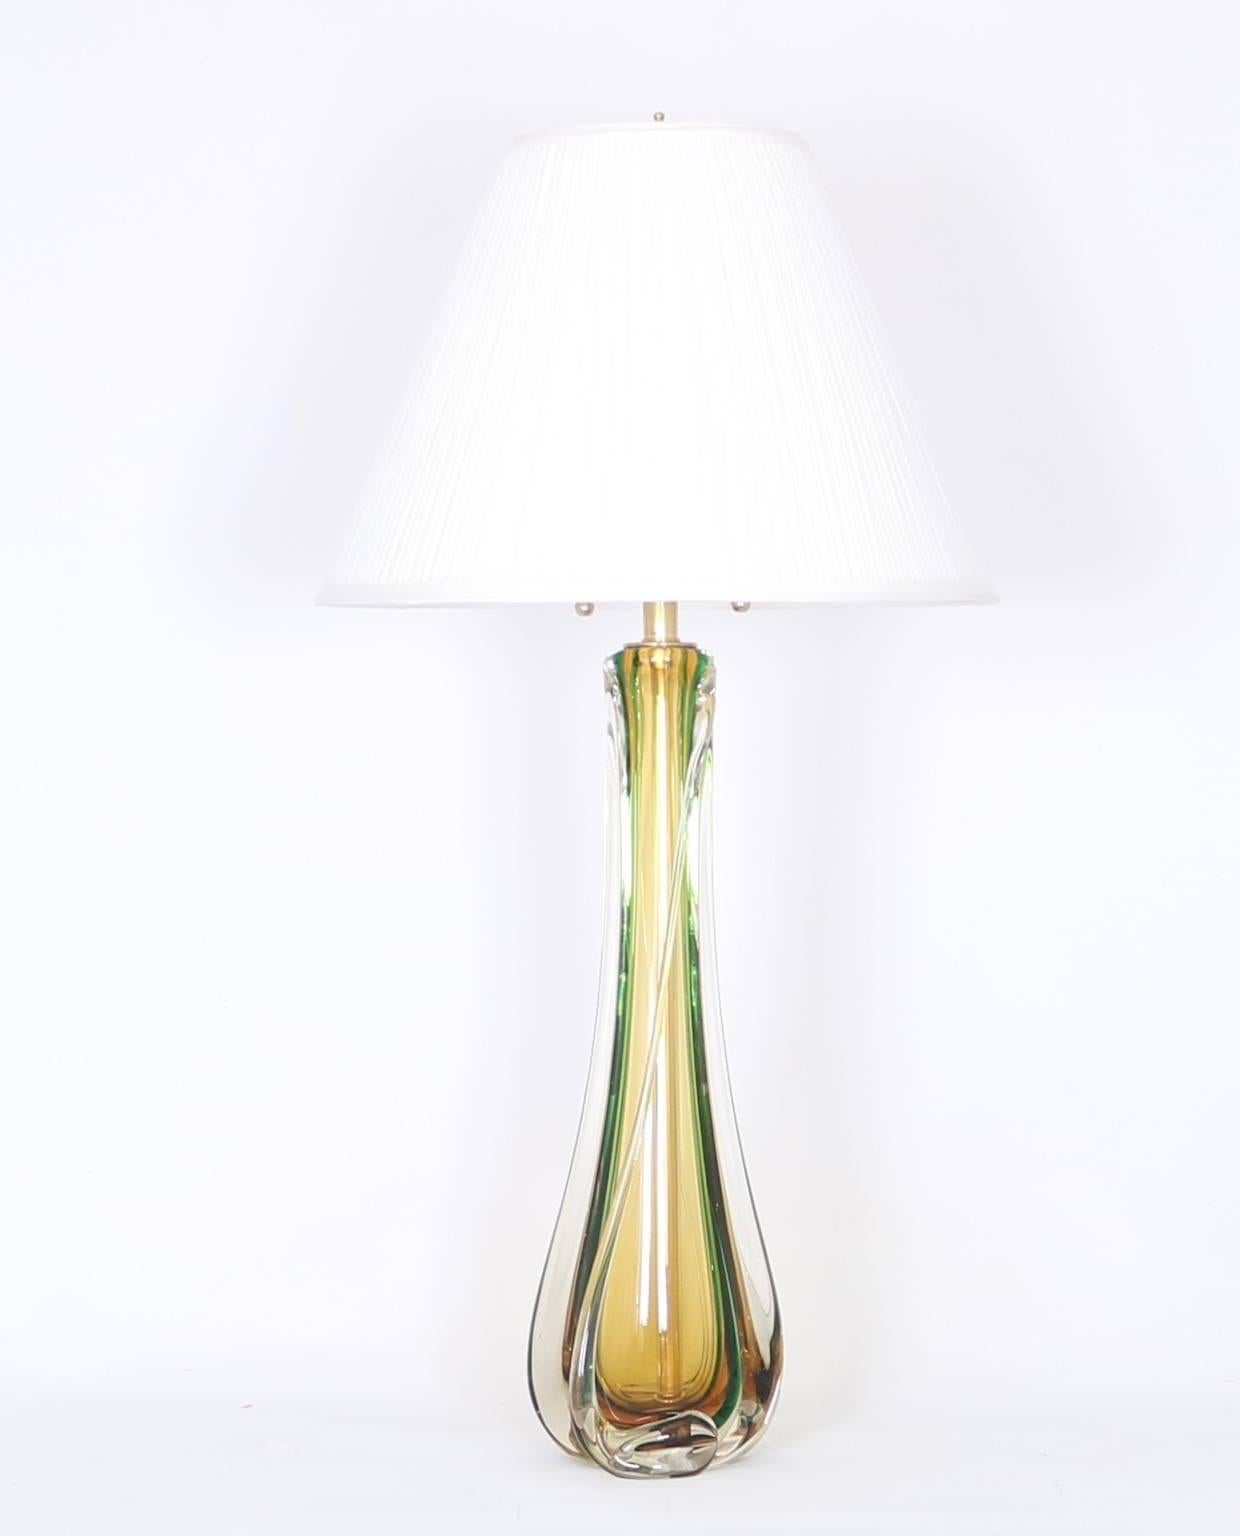 20th Century Murano Glass Lamp by Seguso in Green and Amber